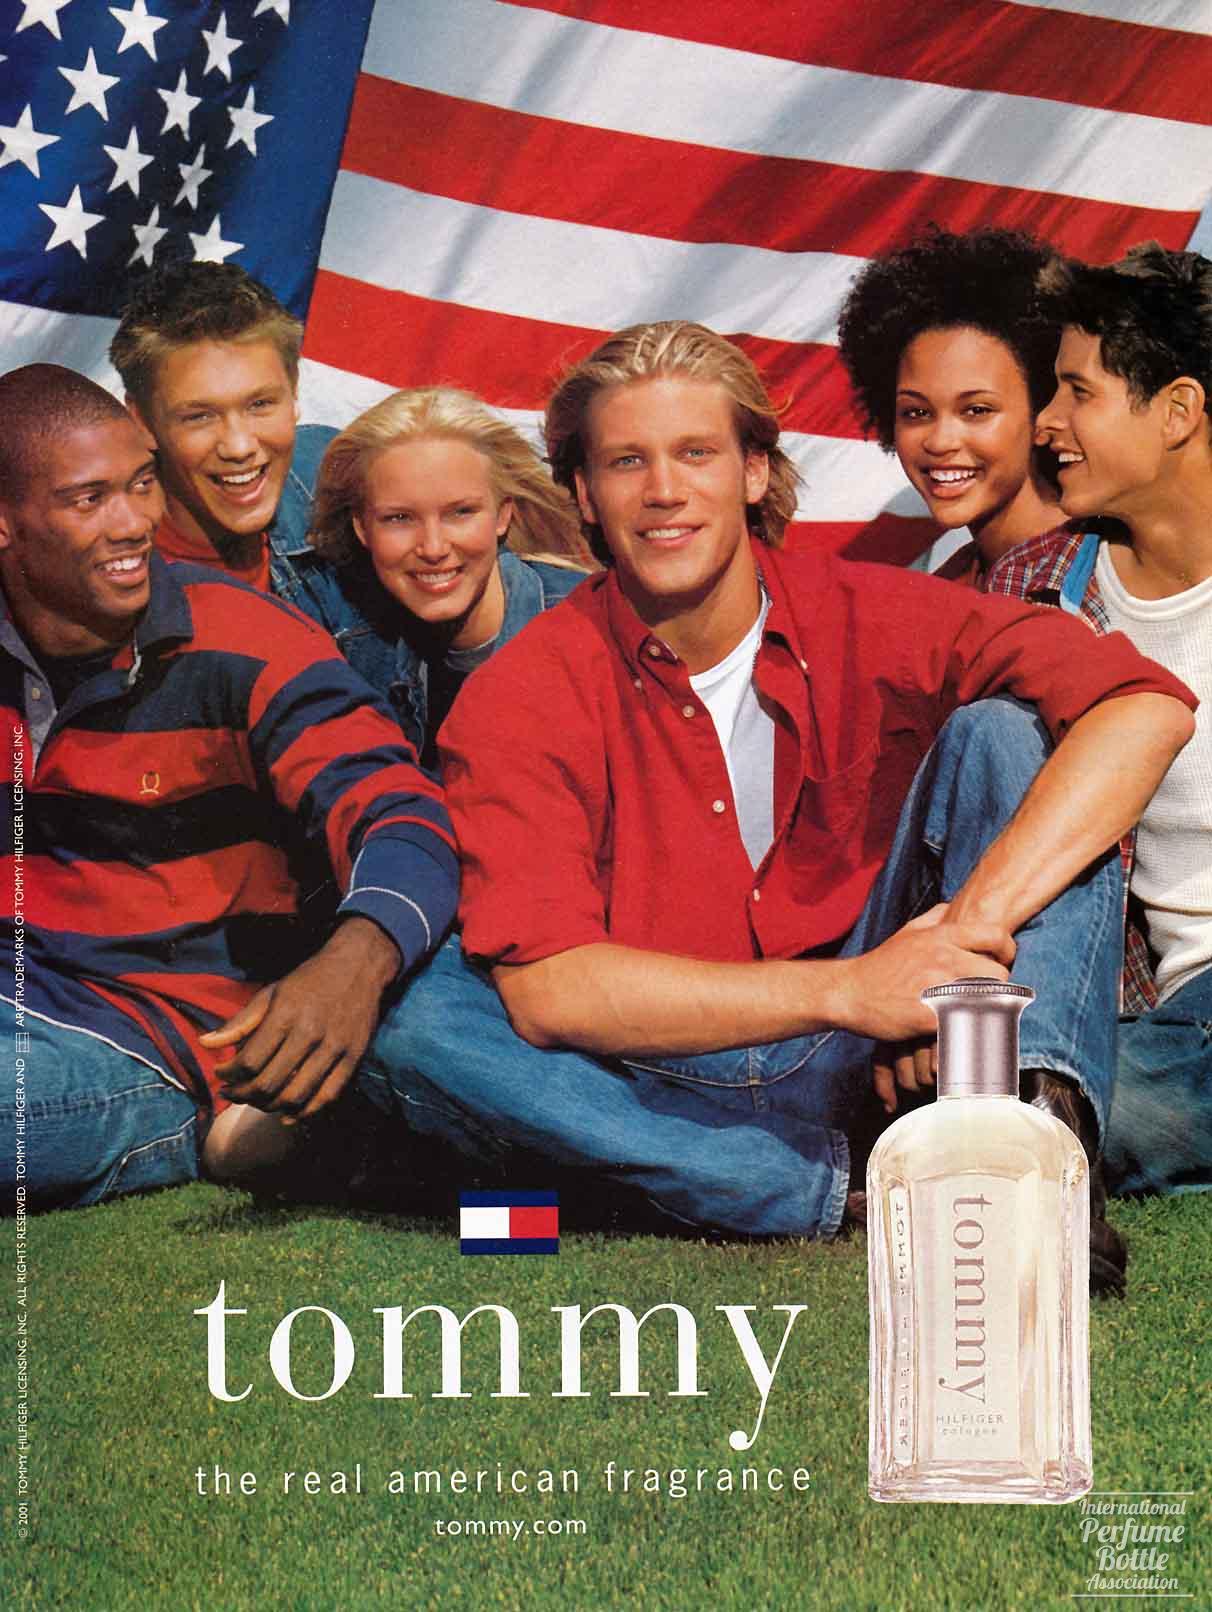 "Tommy" by Tommy Hilfiger Advertisement - 2002